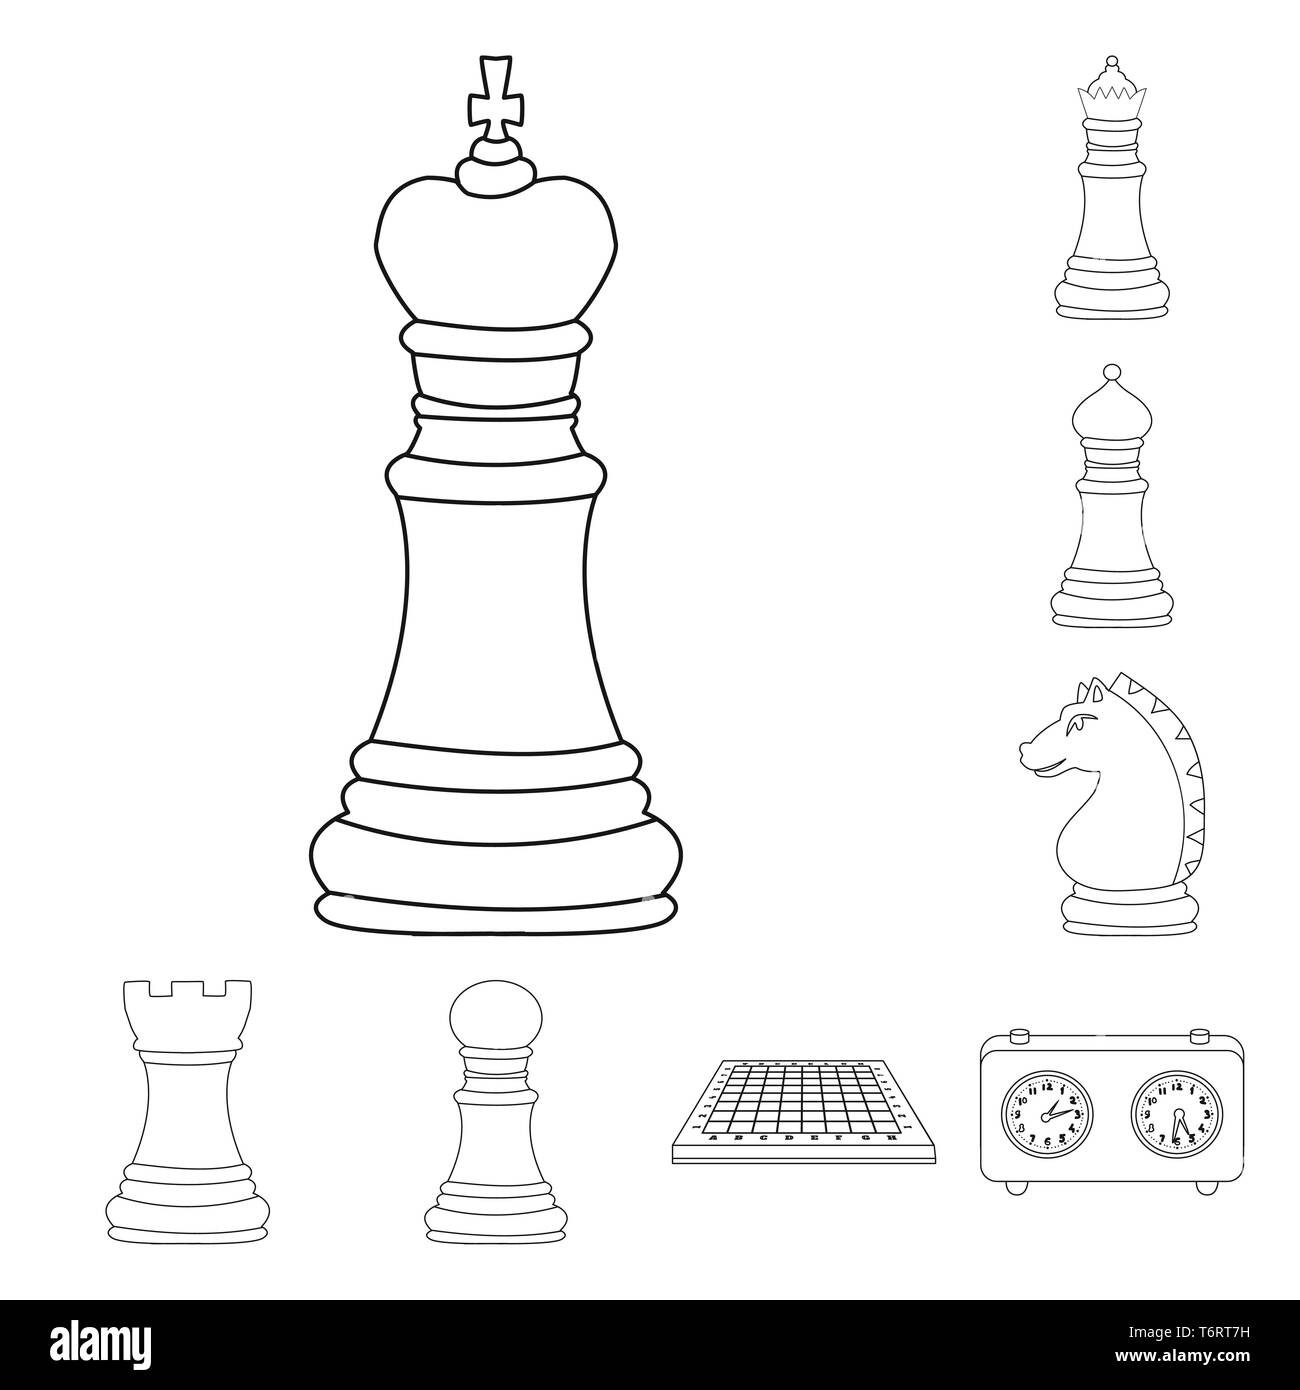 king,queen,bishop,knight,rook,pawn,chessboard,clock,board,strategic,horse,black,timer,leadership,check,head,network,counter,table,button,leader,business,figure,change,cage,period,manager,sport,piece,strategy,tactical,play,checkmate,thin,club,target,chess,game,set,vector,icon,illustration,isolated,collection,design,element,graphic,sign,outline,line Vector Vectors , Stock Vector